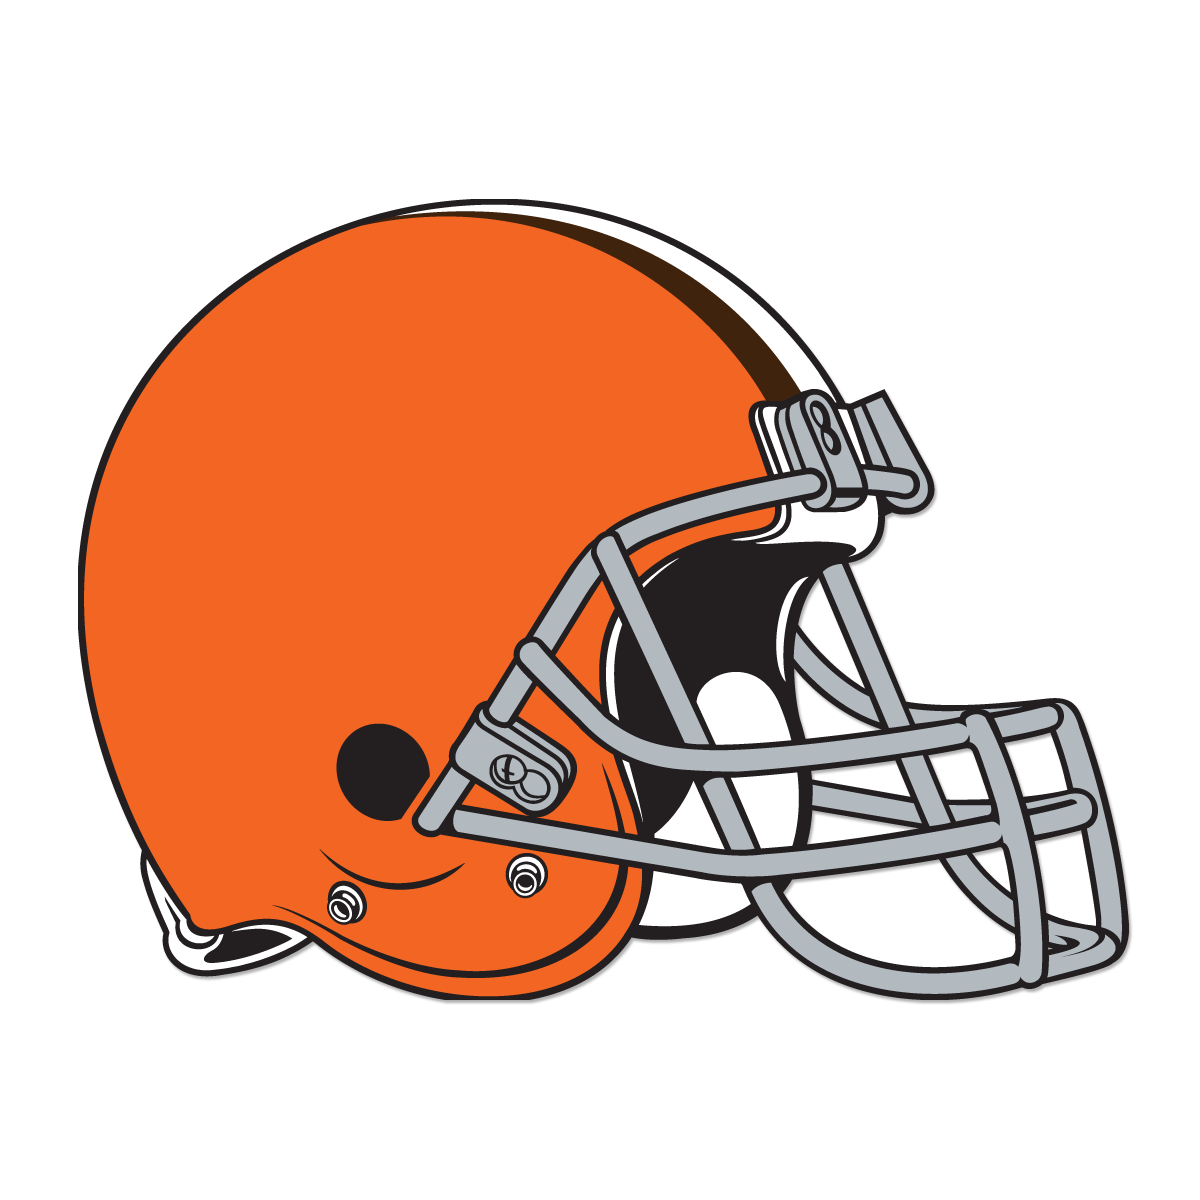 Free Chicago Bears Logo Png, Download Free Clip Art, Free Clip Art on